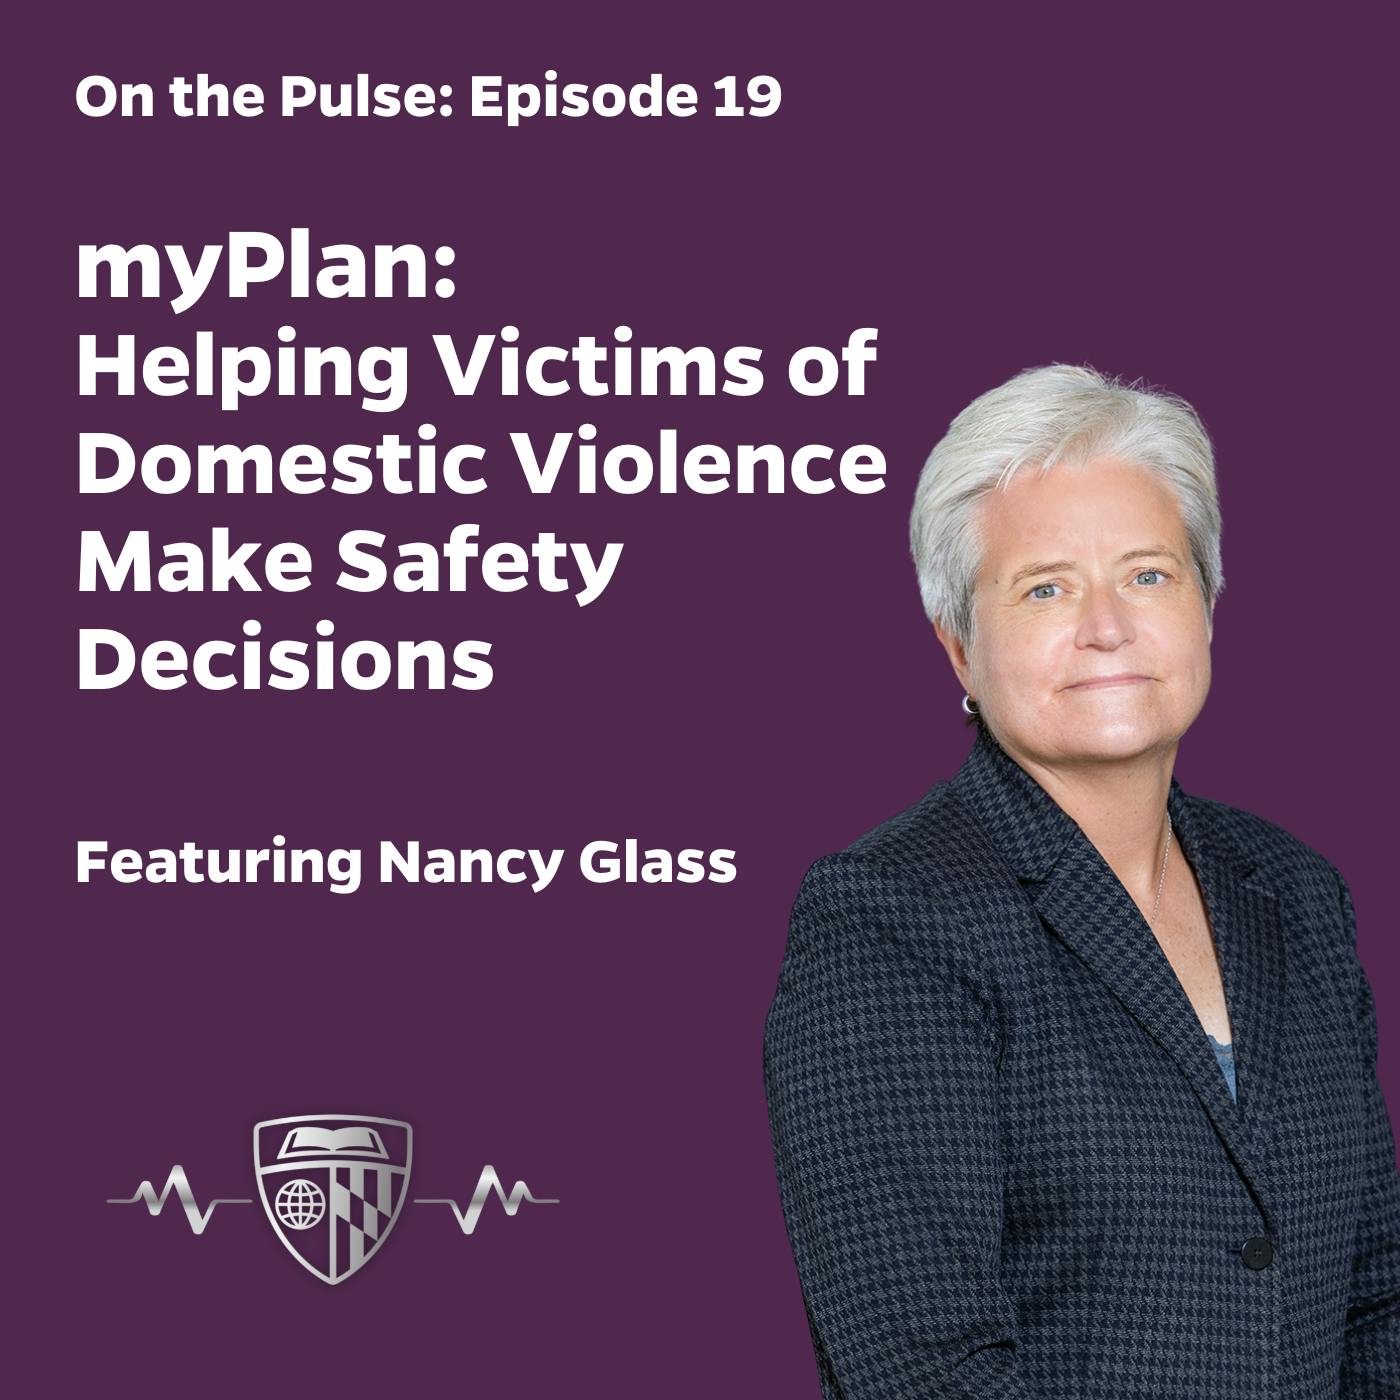 Episode 19: myPlan: Helping Victims of Domestic Violence Make Safety Decisions